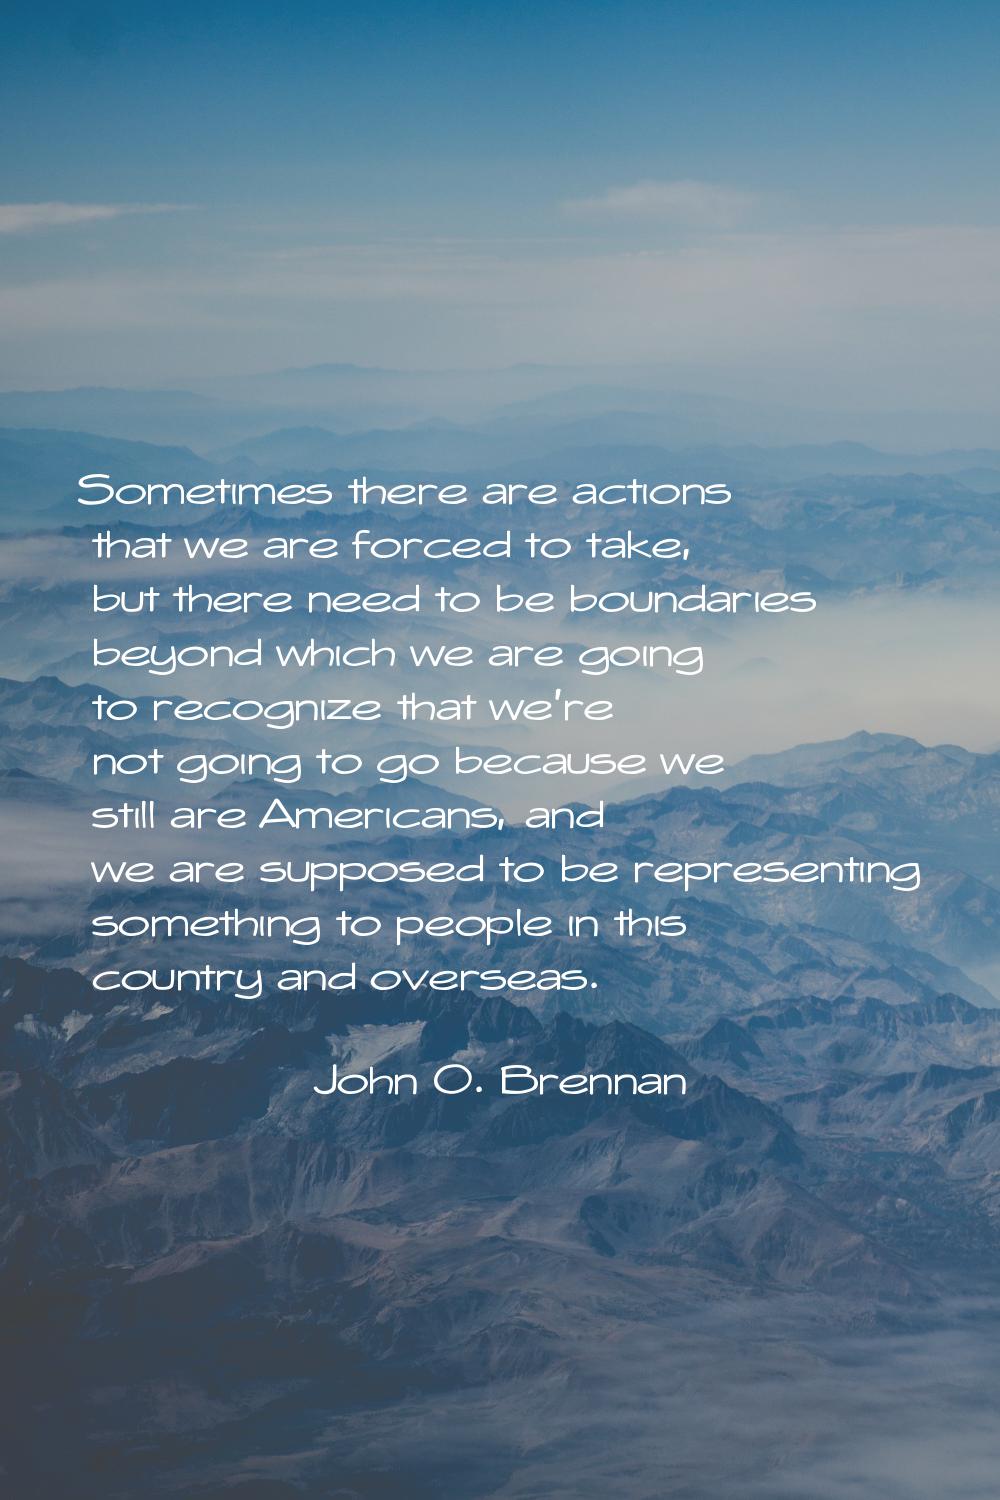 Sometimes there are actions that we are forced to take, but there need to be boundaries beyond whic